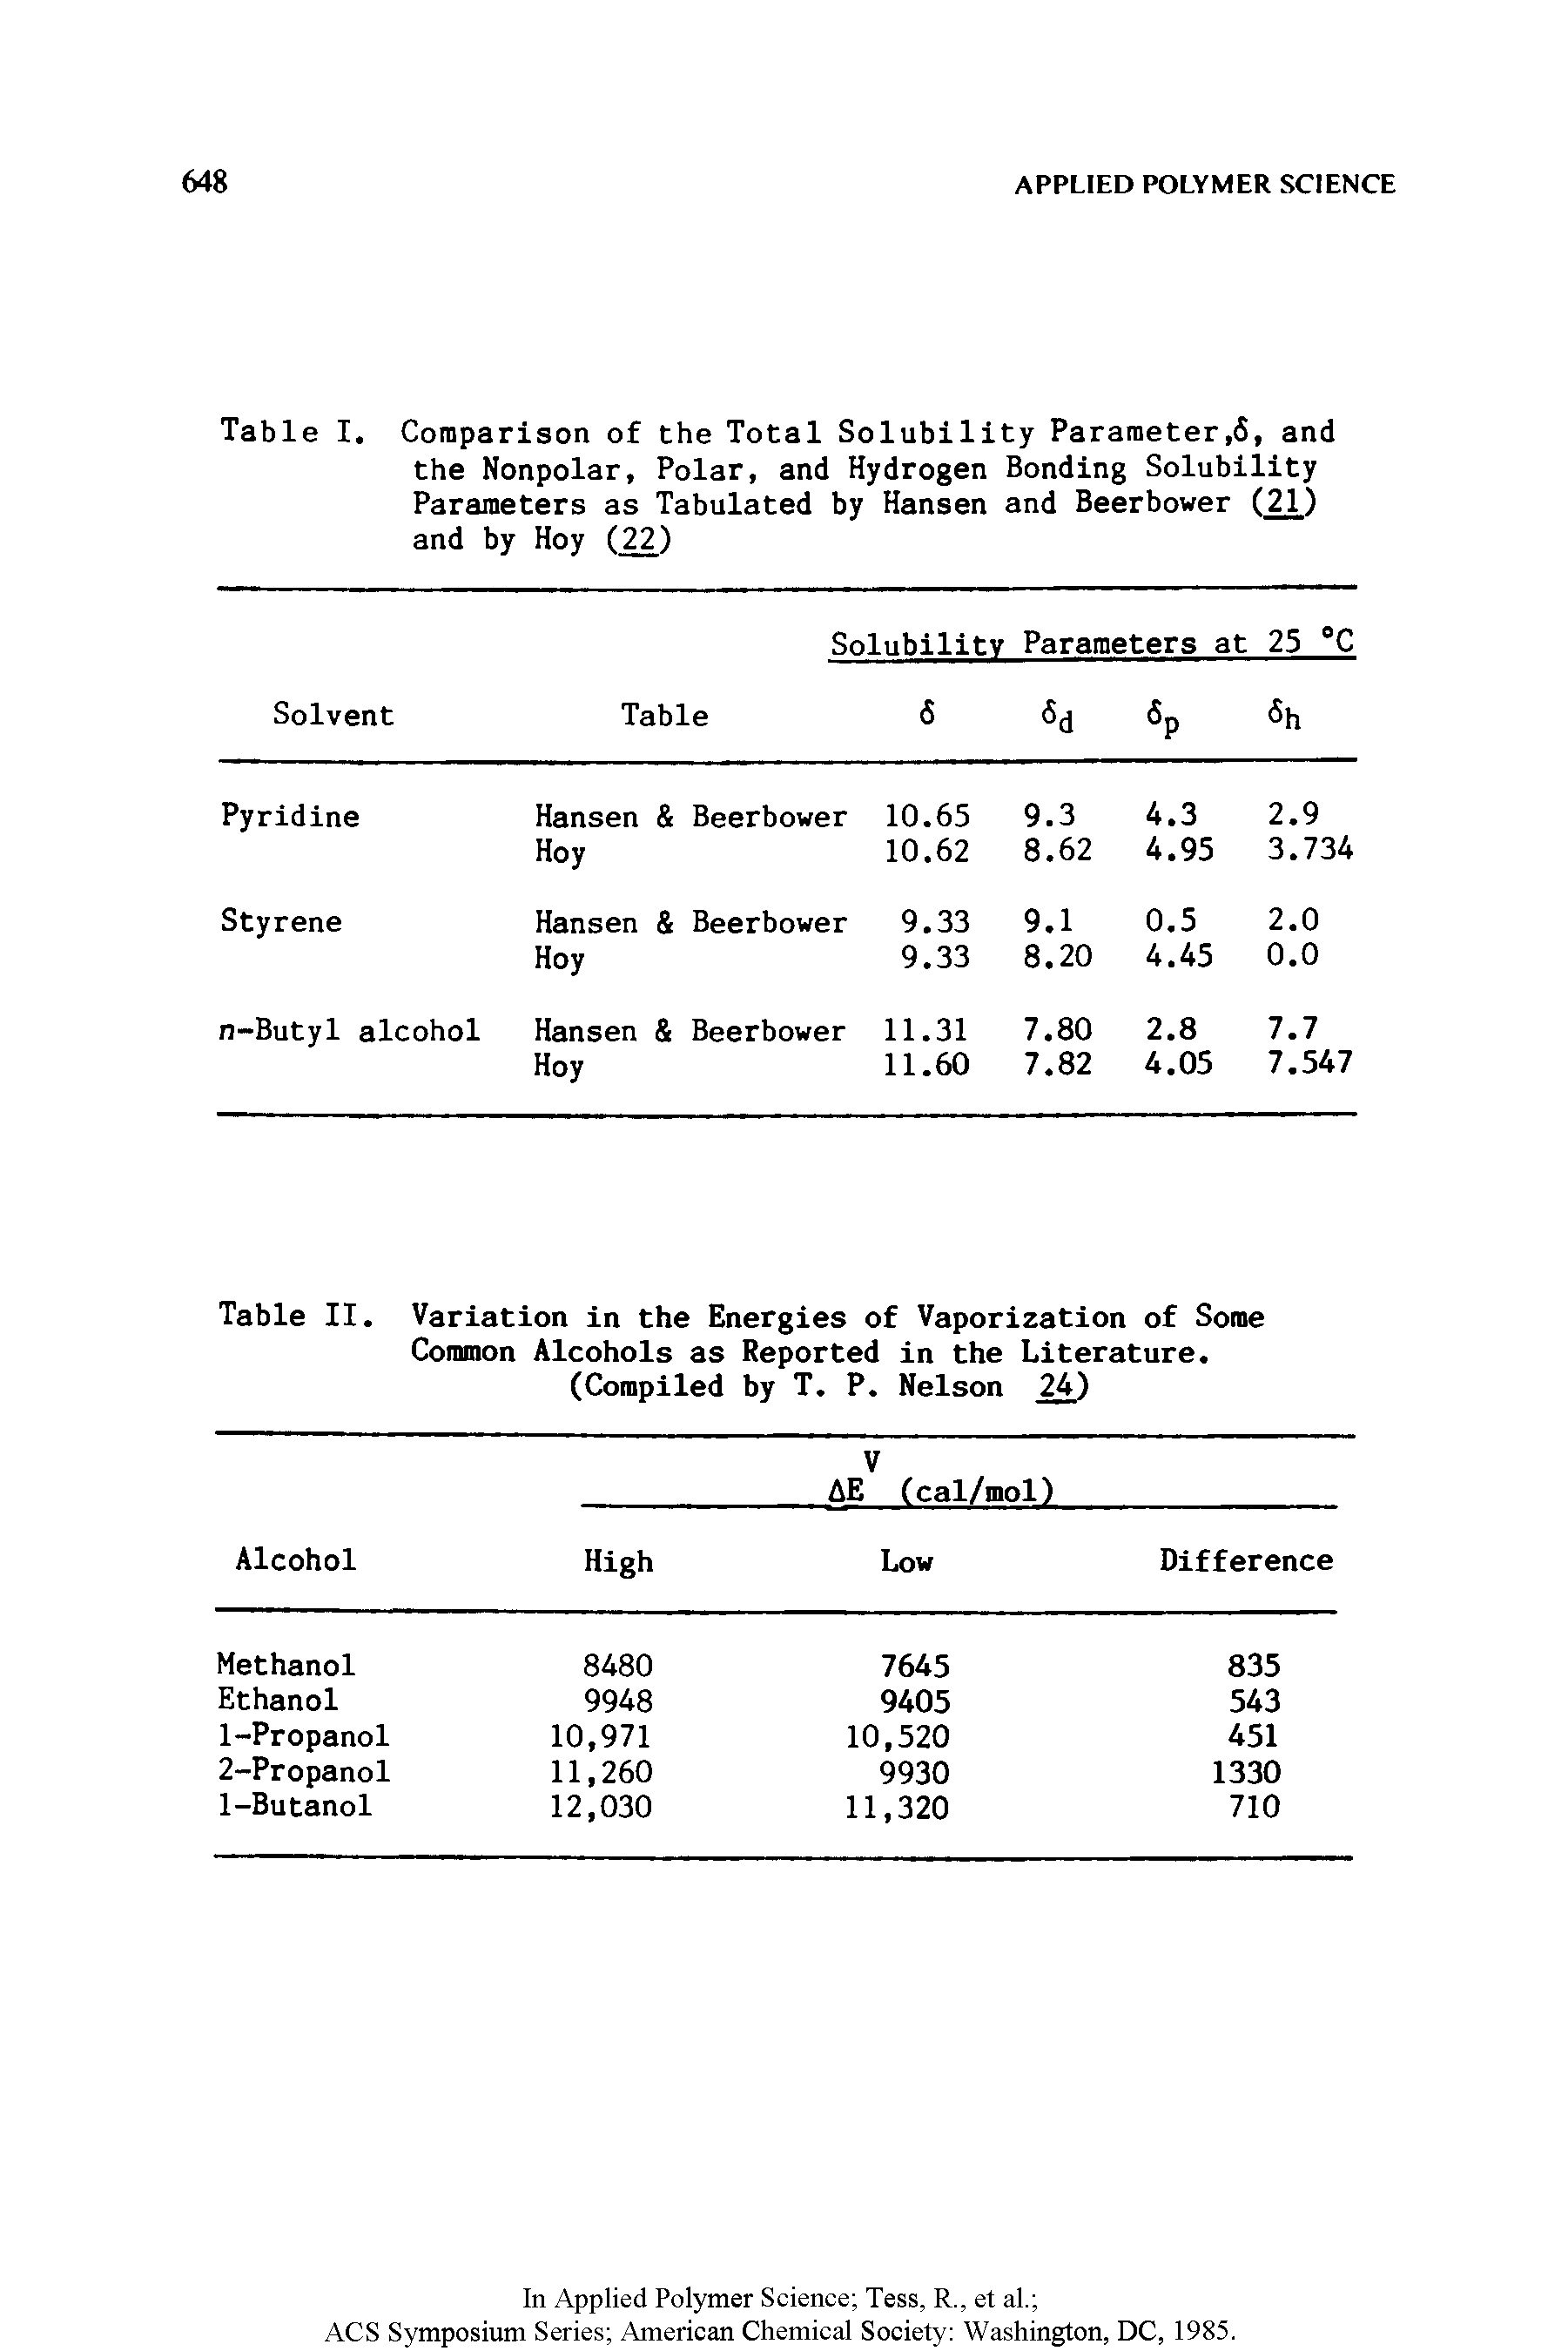 Table I. Comparison of the Total Solubility Parameter,6, and the Nonpolar, Polar, and Hydrogen Bonding Solubility Parameters as Tabulated by Hansen and Beerbower (21) and by Hoy (22)...